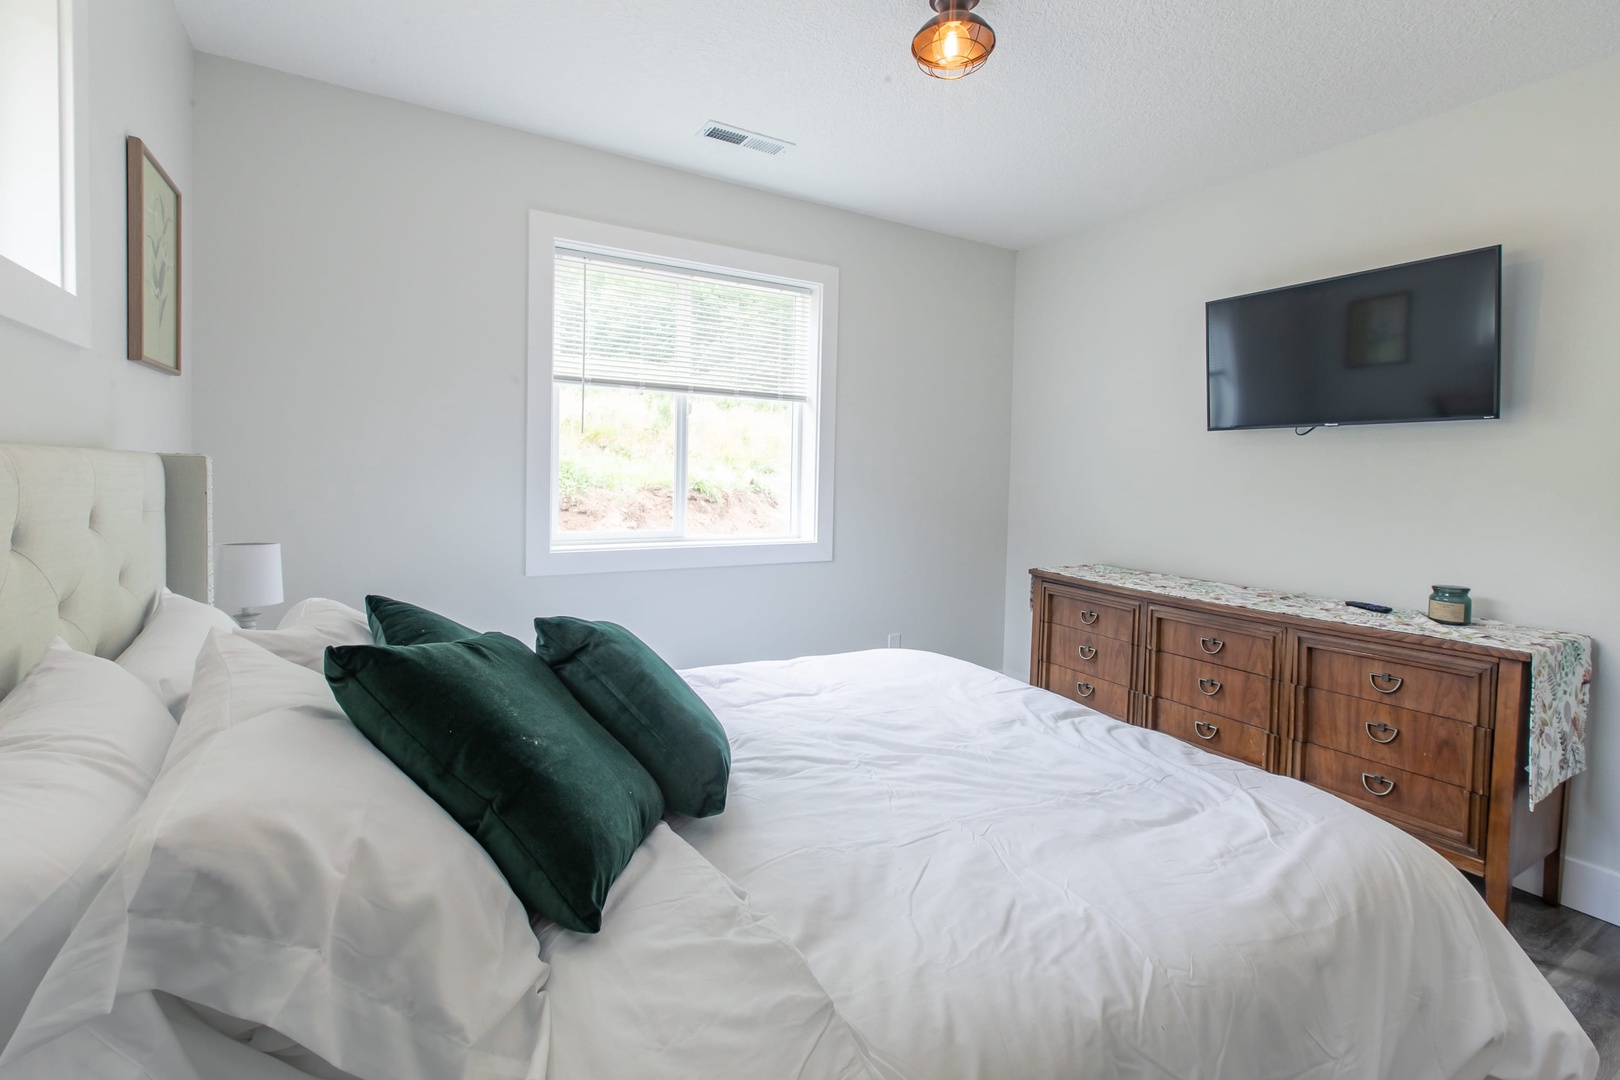 Nehalem Vacation Rentals, Nehalem Coastal Oasis - The primary and guest bedrooms each have a comfortable queen bed, flat-screen TV, and closet